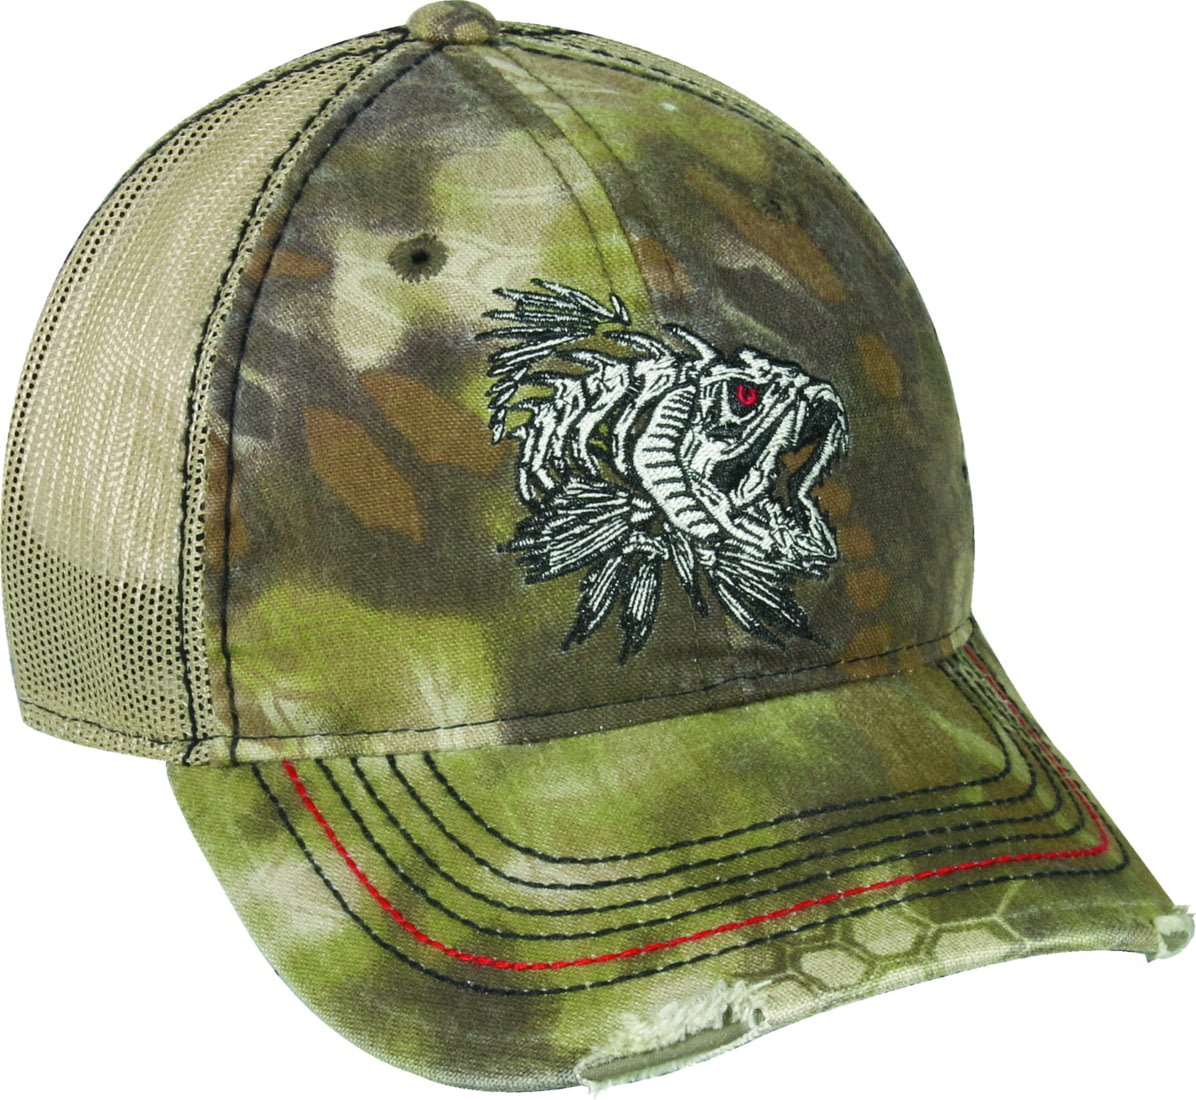 Outdoor Cap Kryptek Angry Fish Cap | Free Shipping over $49!